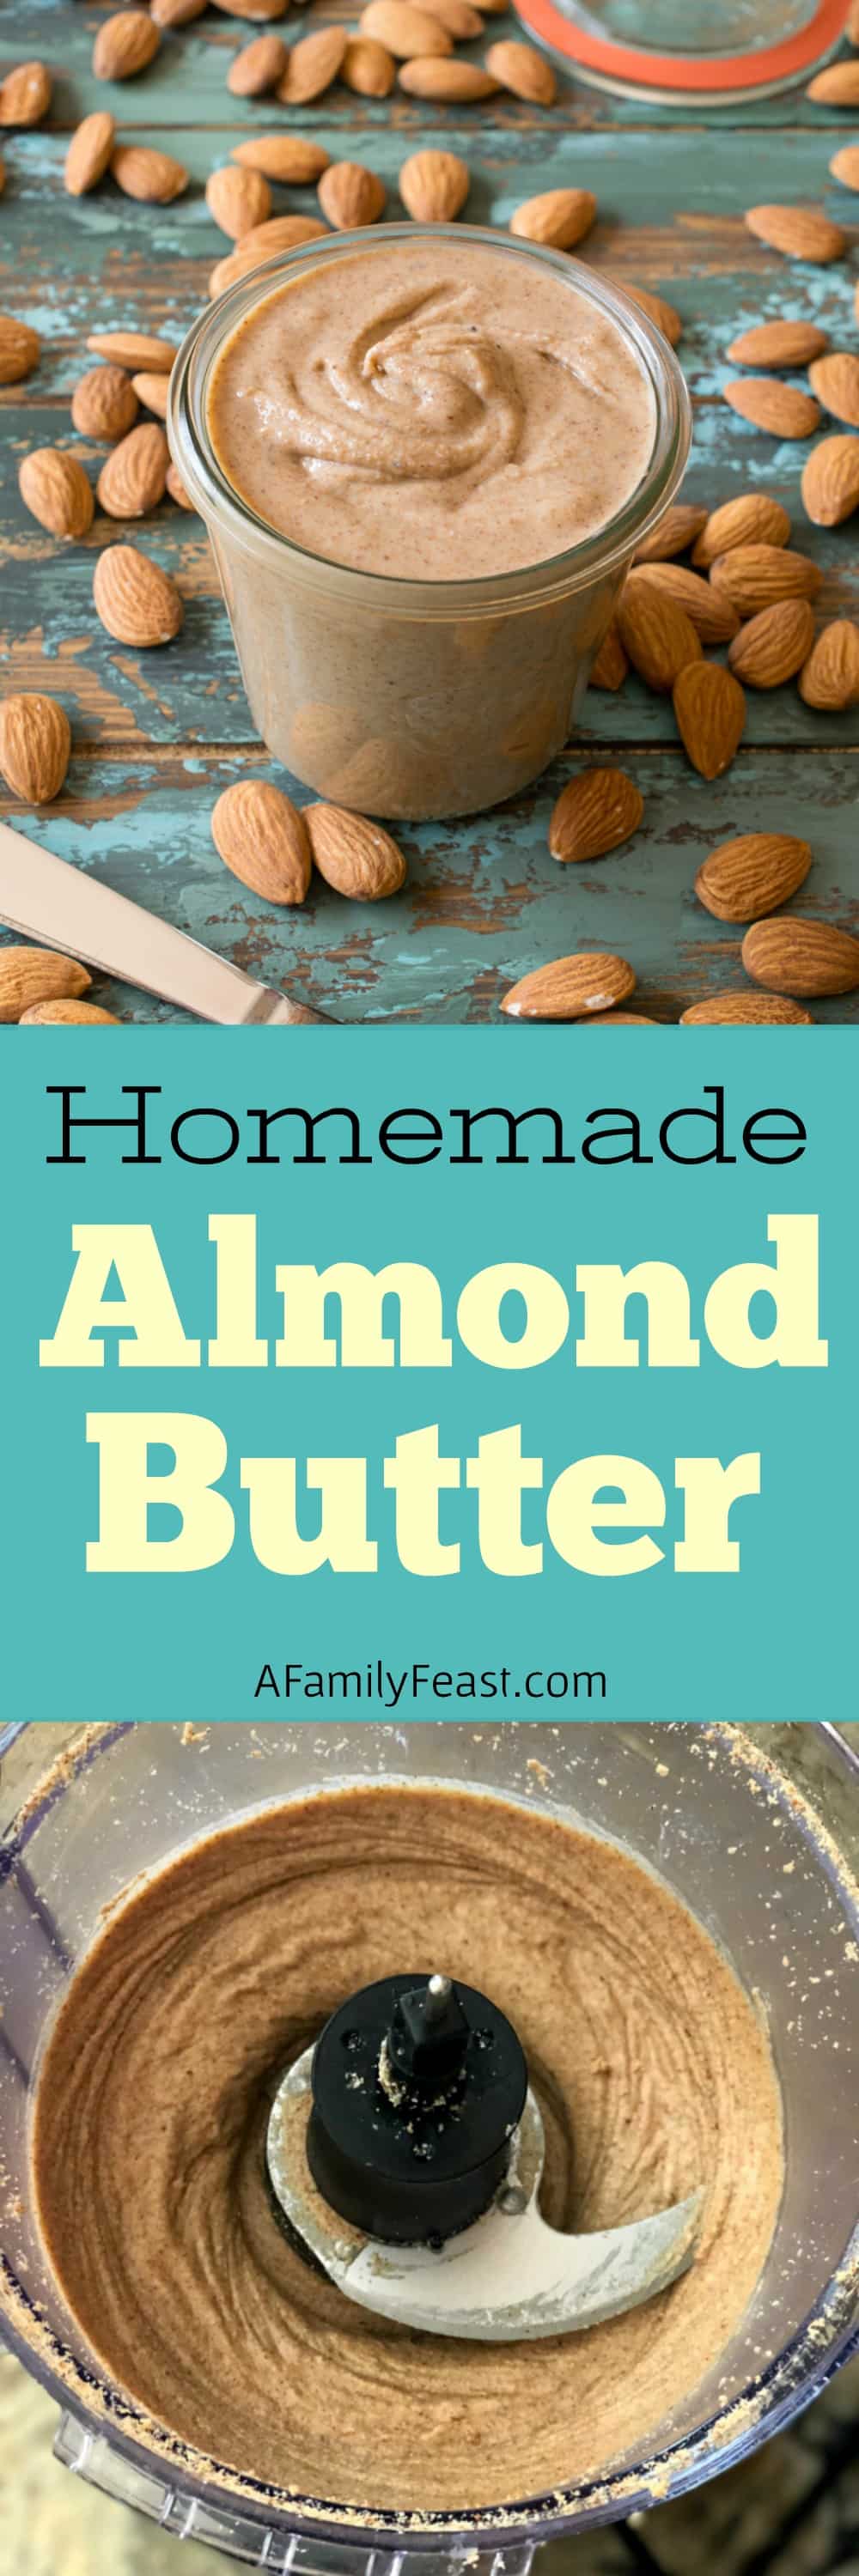 How to make Homemade Almond Butter